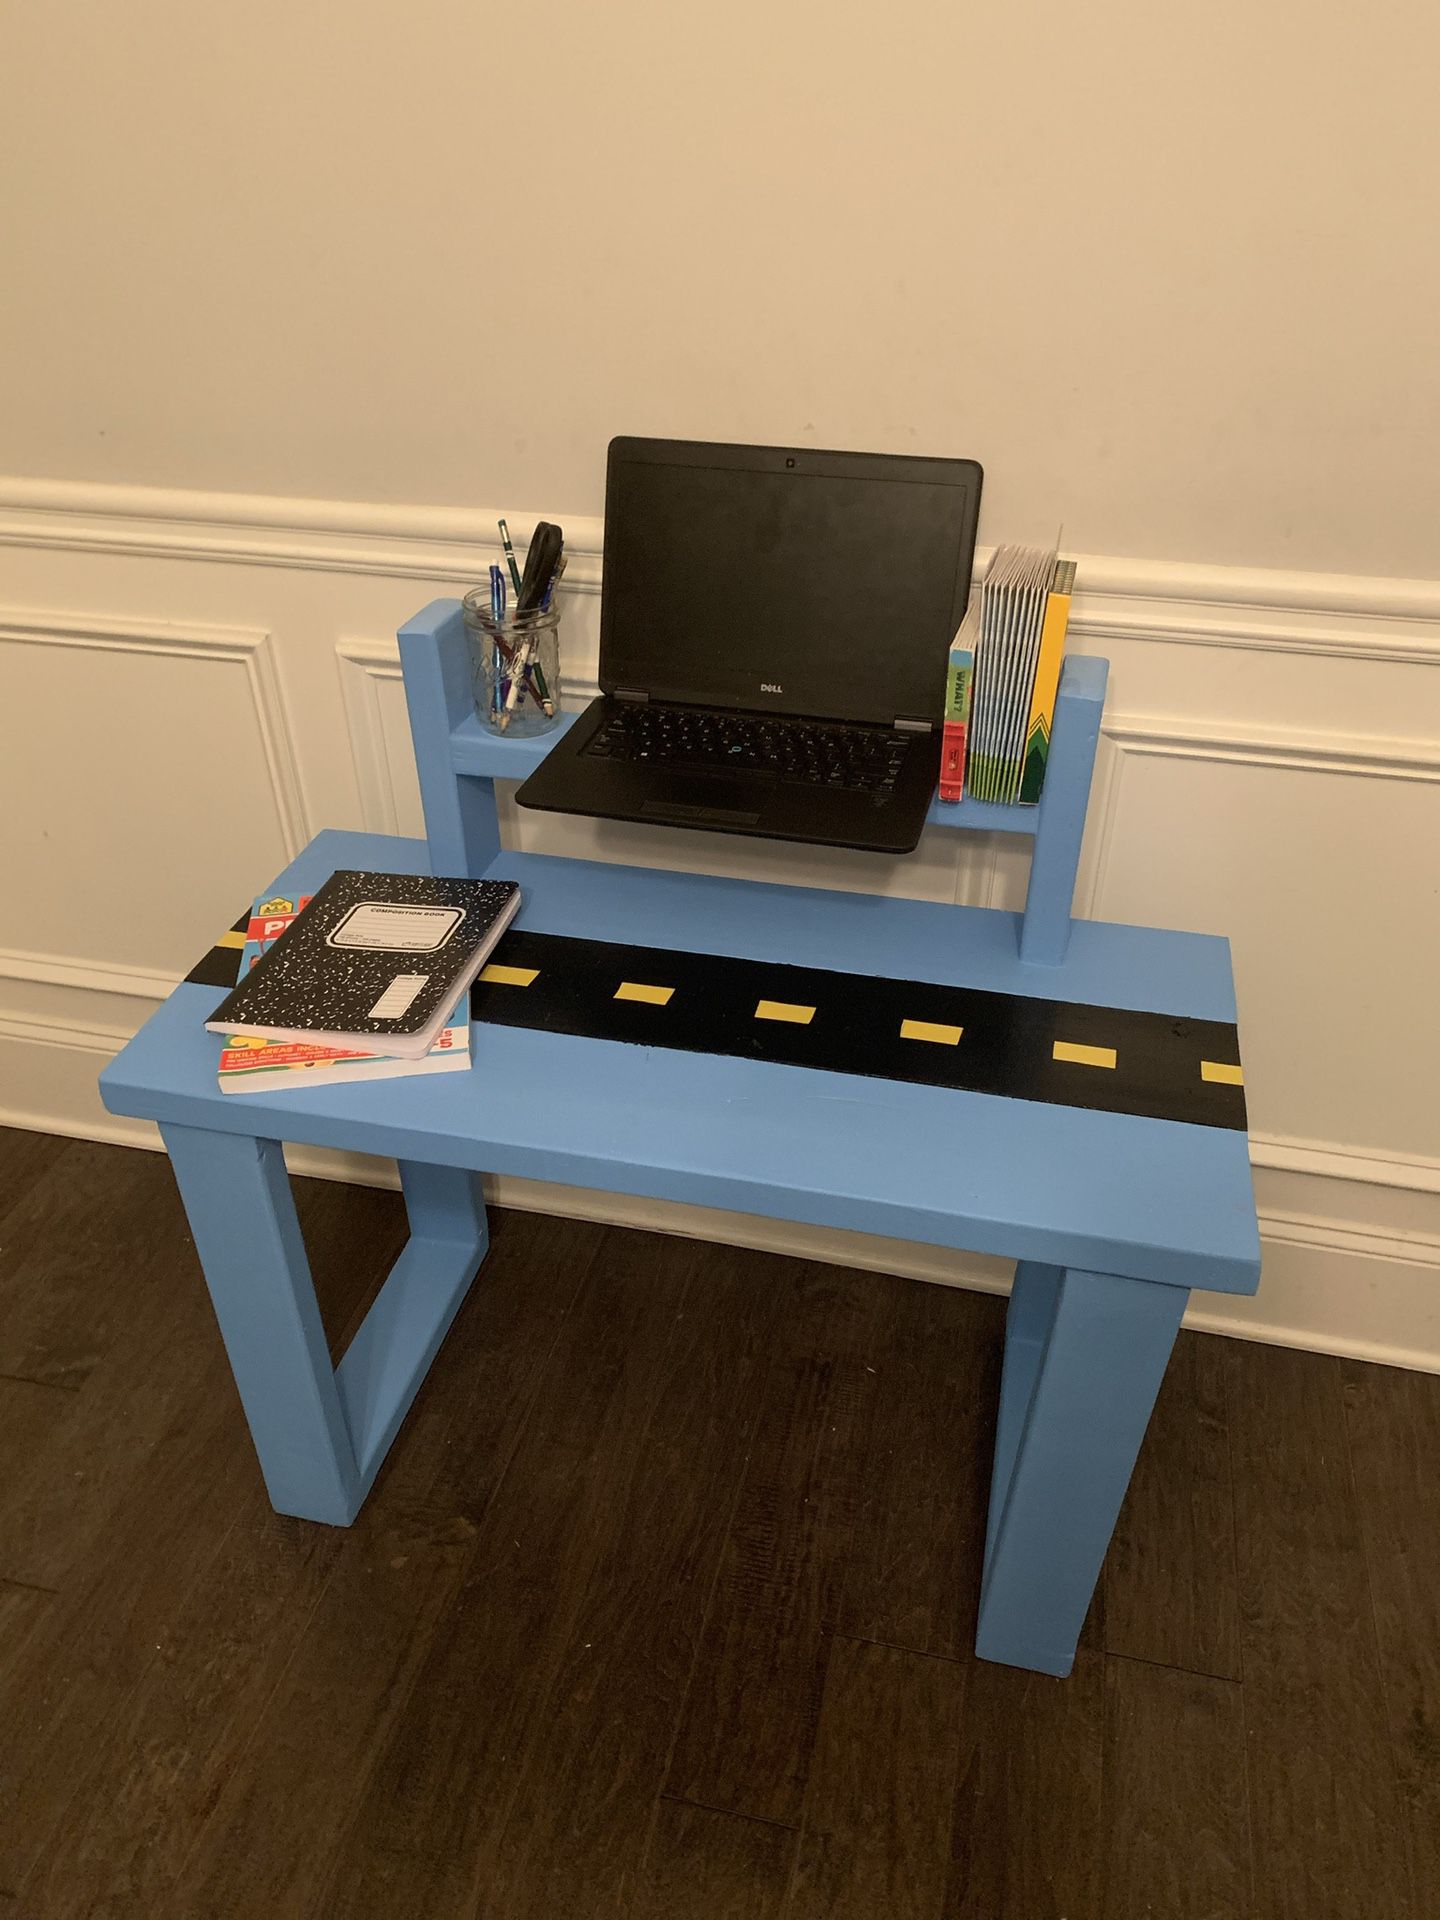 Solid wood Farmhouse style kid / child desk / table and chair set - Blue and Black Race car theme